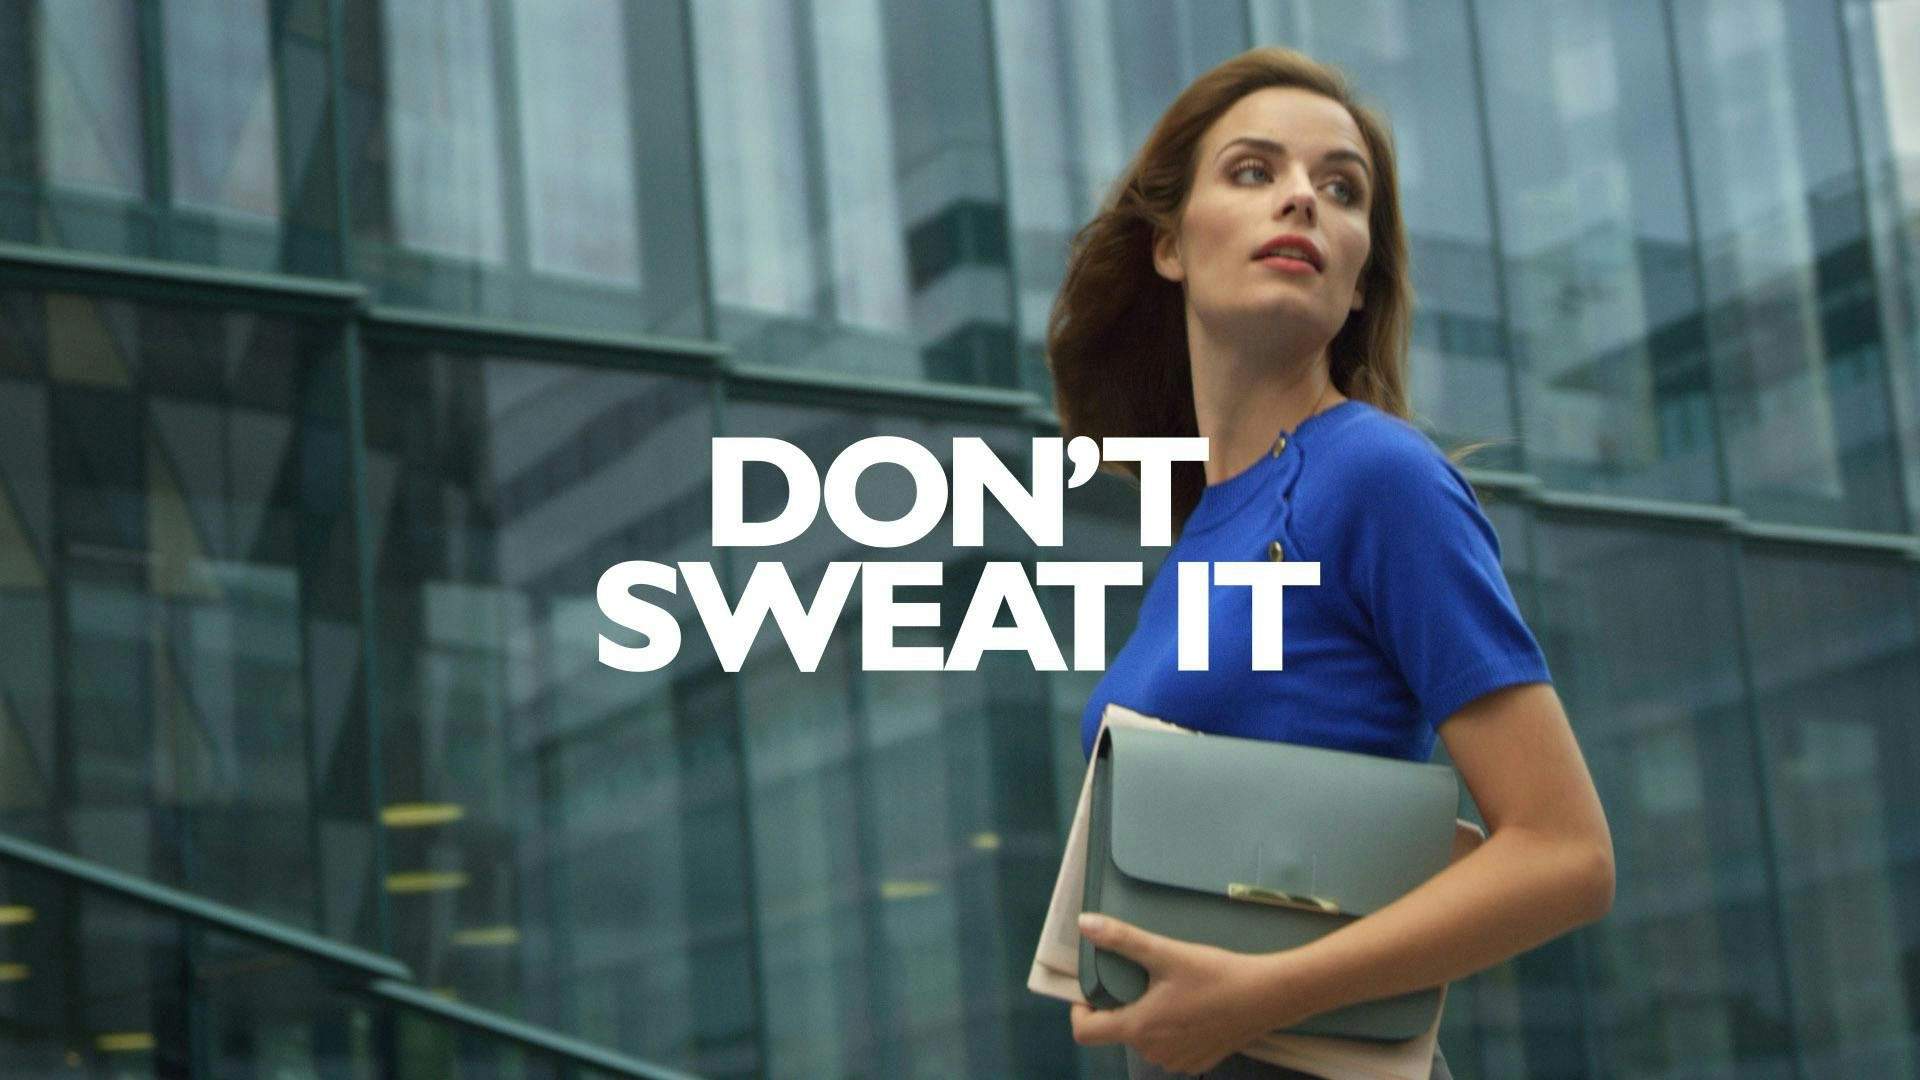 A live action shot of a woman wearing a blue dress and a gray handbag. The tagline "Don't sweat it".